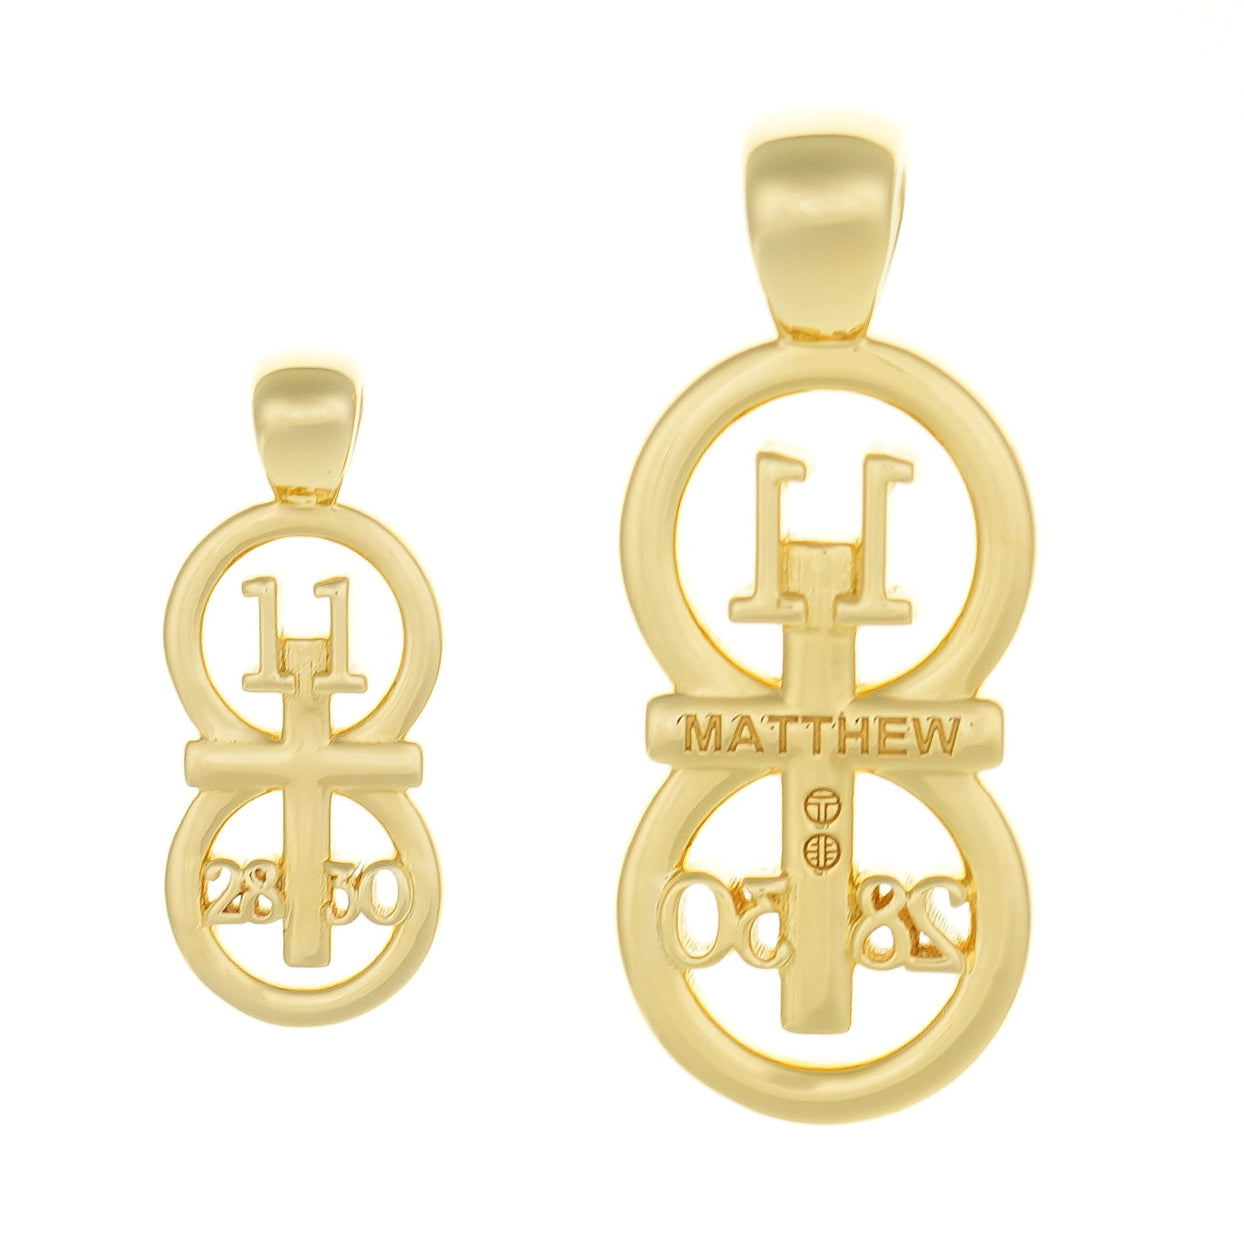 This image shows our small and large pendants side by side. This picture gives a good size comparance to each other. The RIYAN 29 and 11® pendant has the numbers 11, 28, and 30 intertwined with the cross to represent Matthew 11:28-30 with the chapter word "Matthew" inscribed on the back.